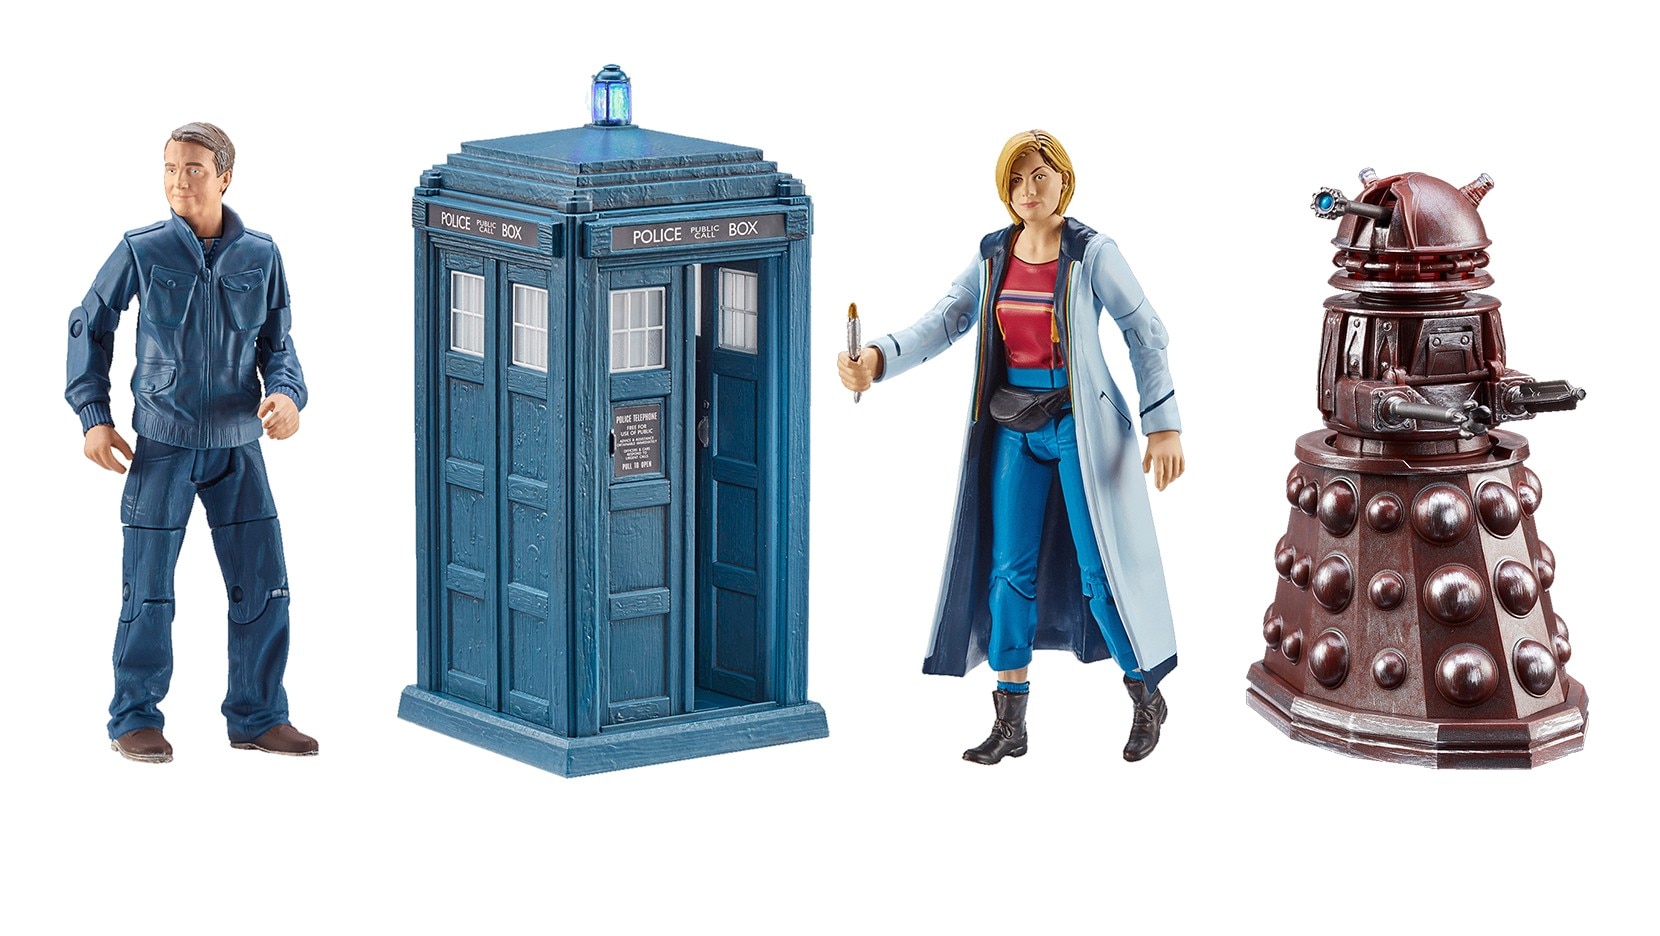 DOCTOR WHO THE THIRTEENTH DOCTOR 5.5" ACTION FIGURE NEW